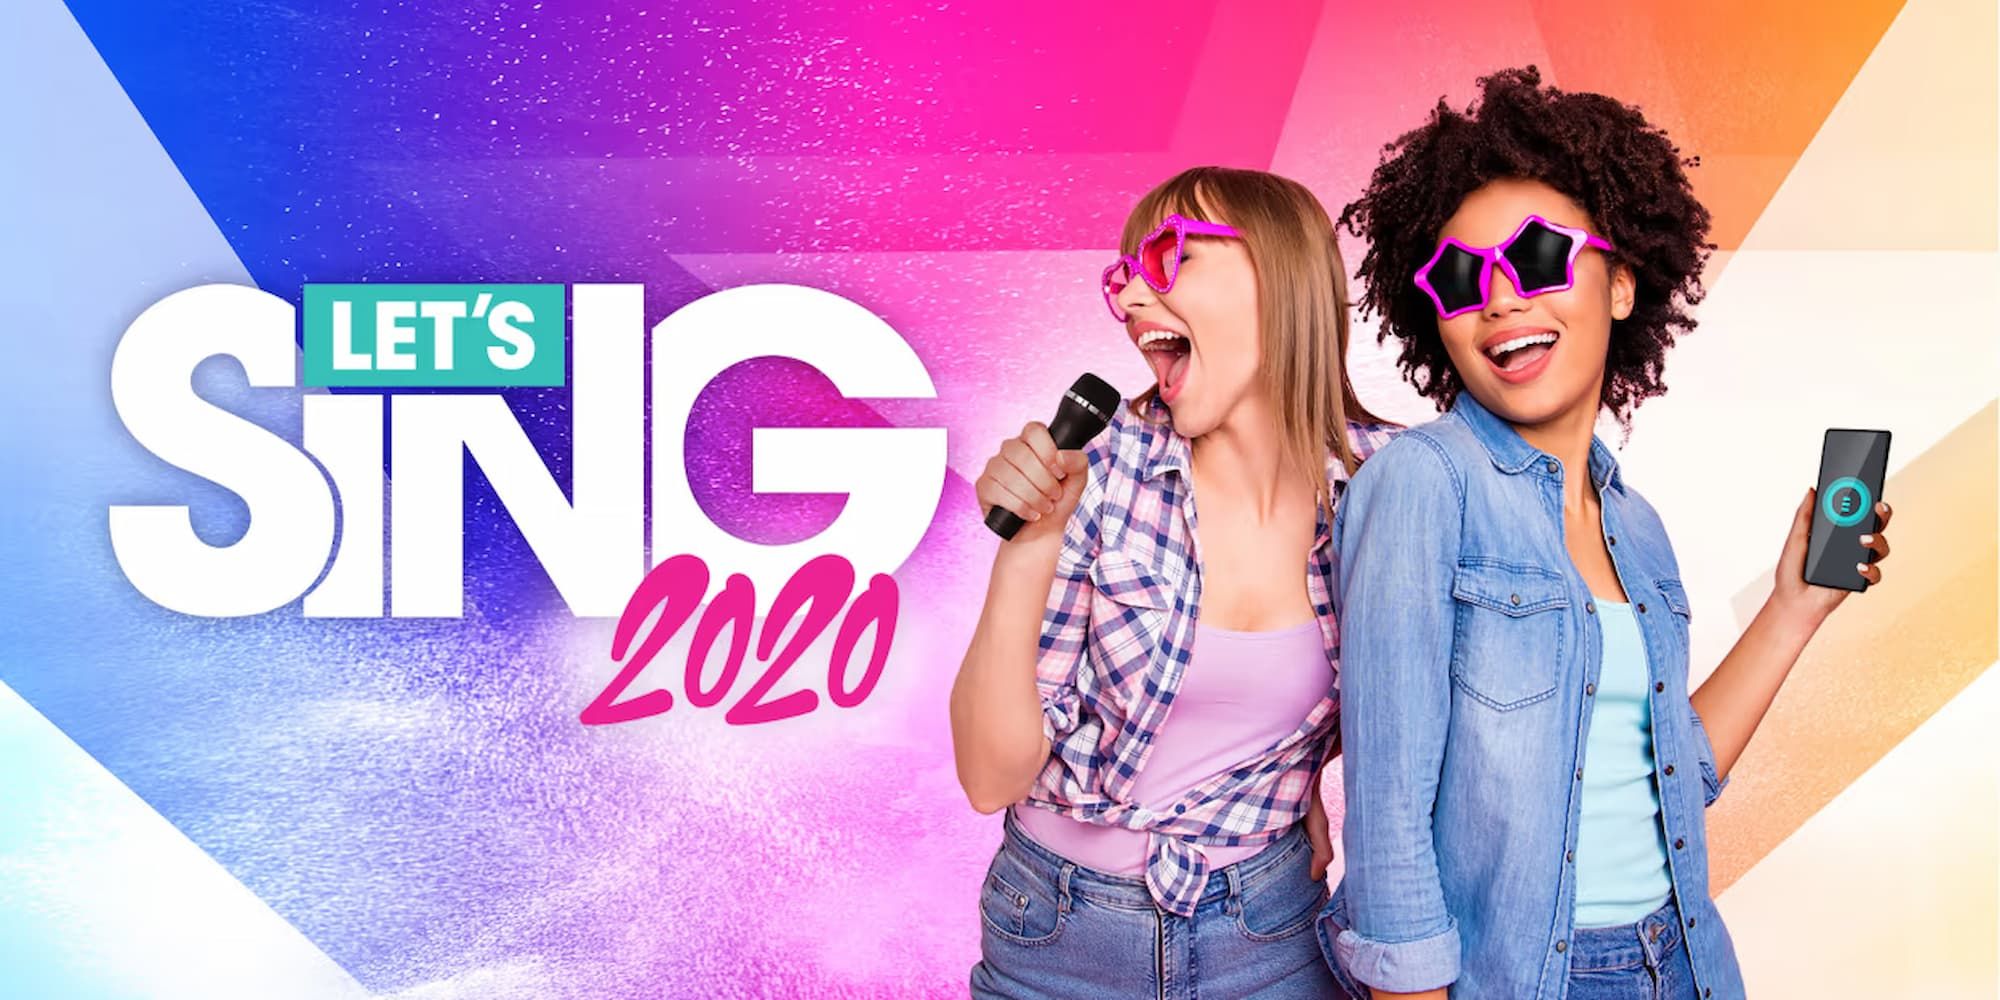 One girl sings into a microphone while another holds a smartphone, and both are wearing sunglasses, in the cover photo for Let's Sing 2020.